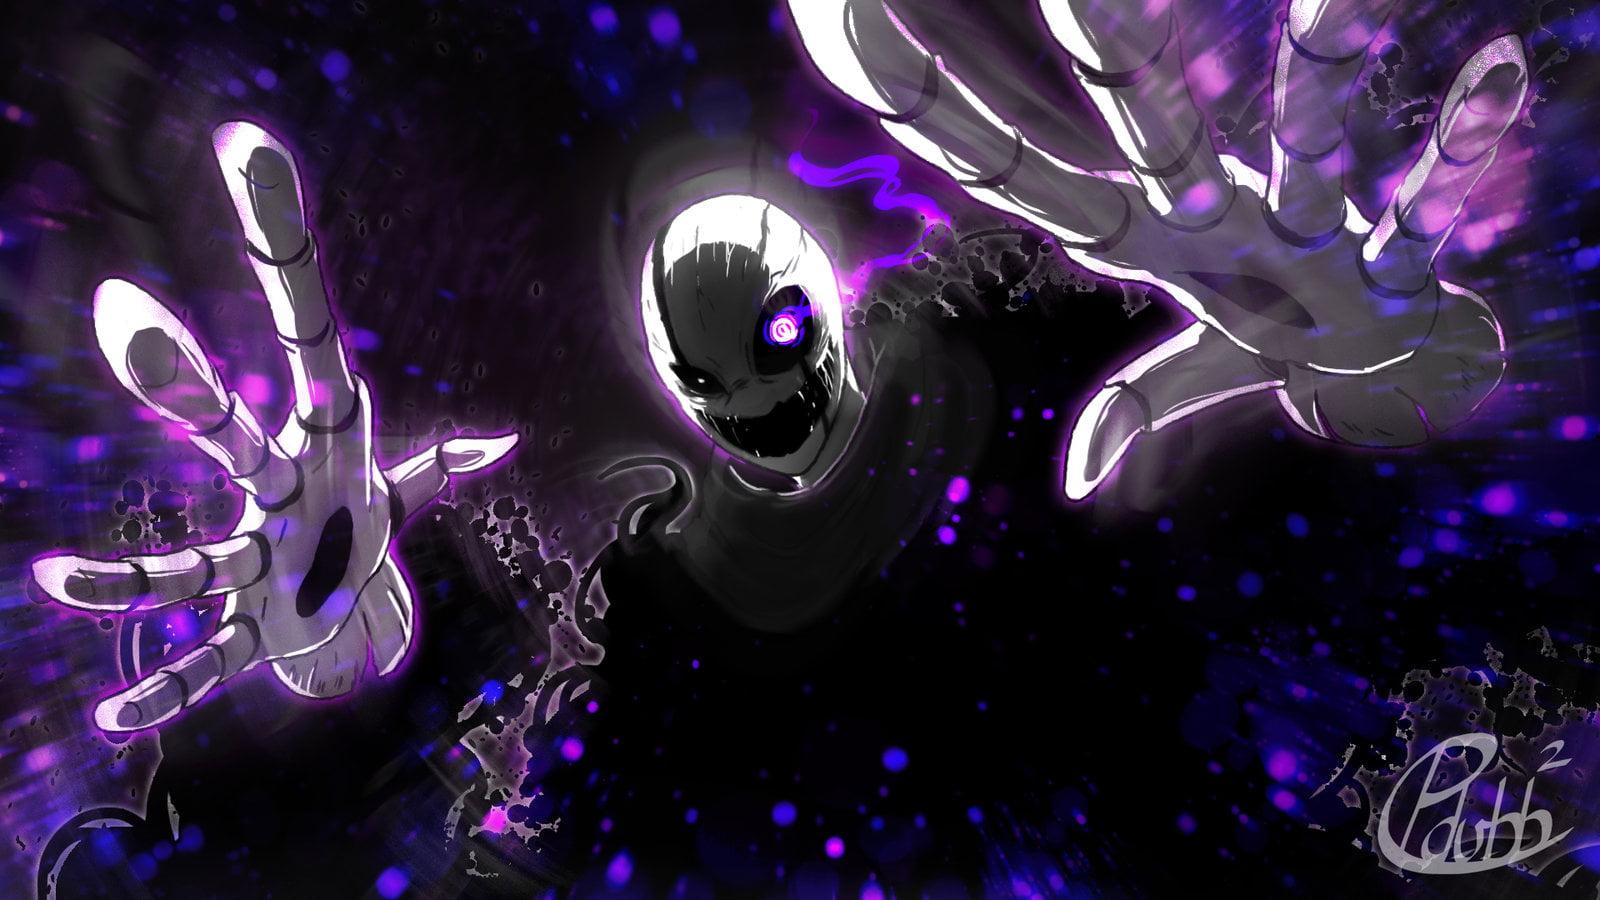 Anime character wallpaper, Undertale, W.D Gaster, indie